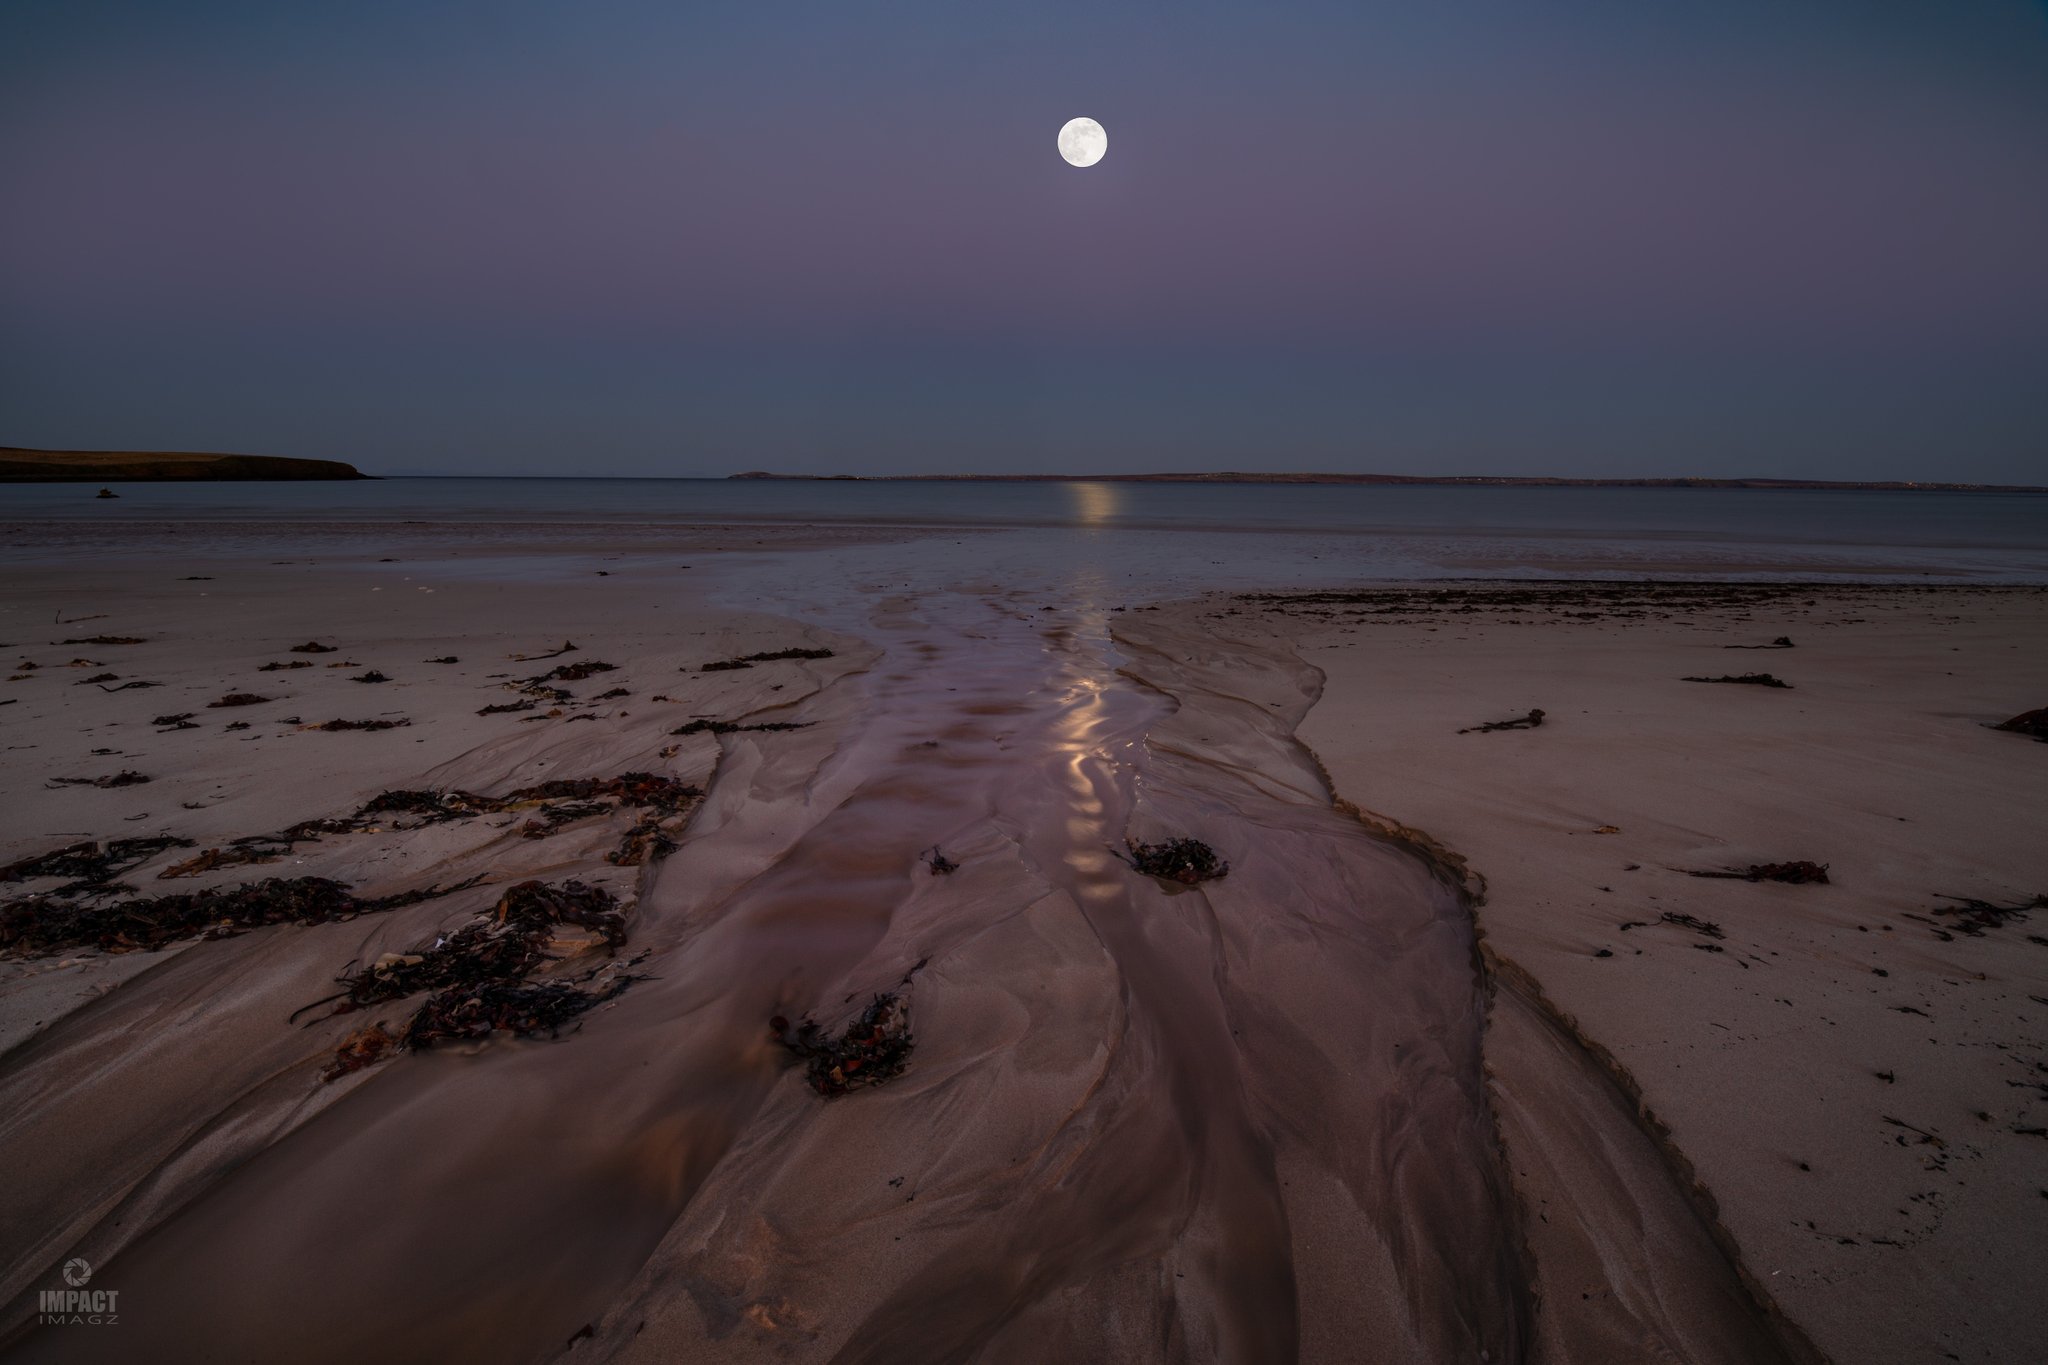 1st Place The Flower Moon rising above the Belt of Venus, taken from Gress Beach, Isle of Lewis by Impact Imagz @ImpactImagz